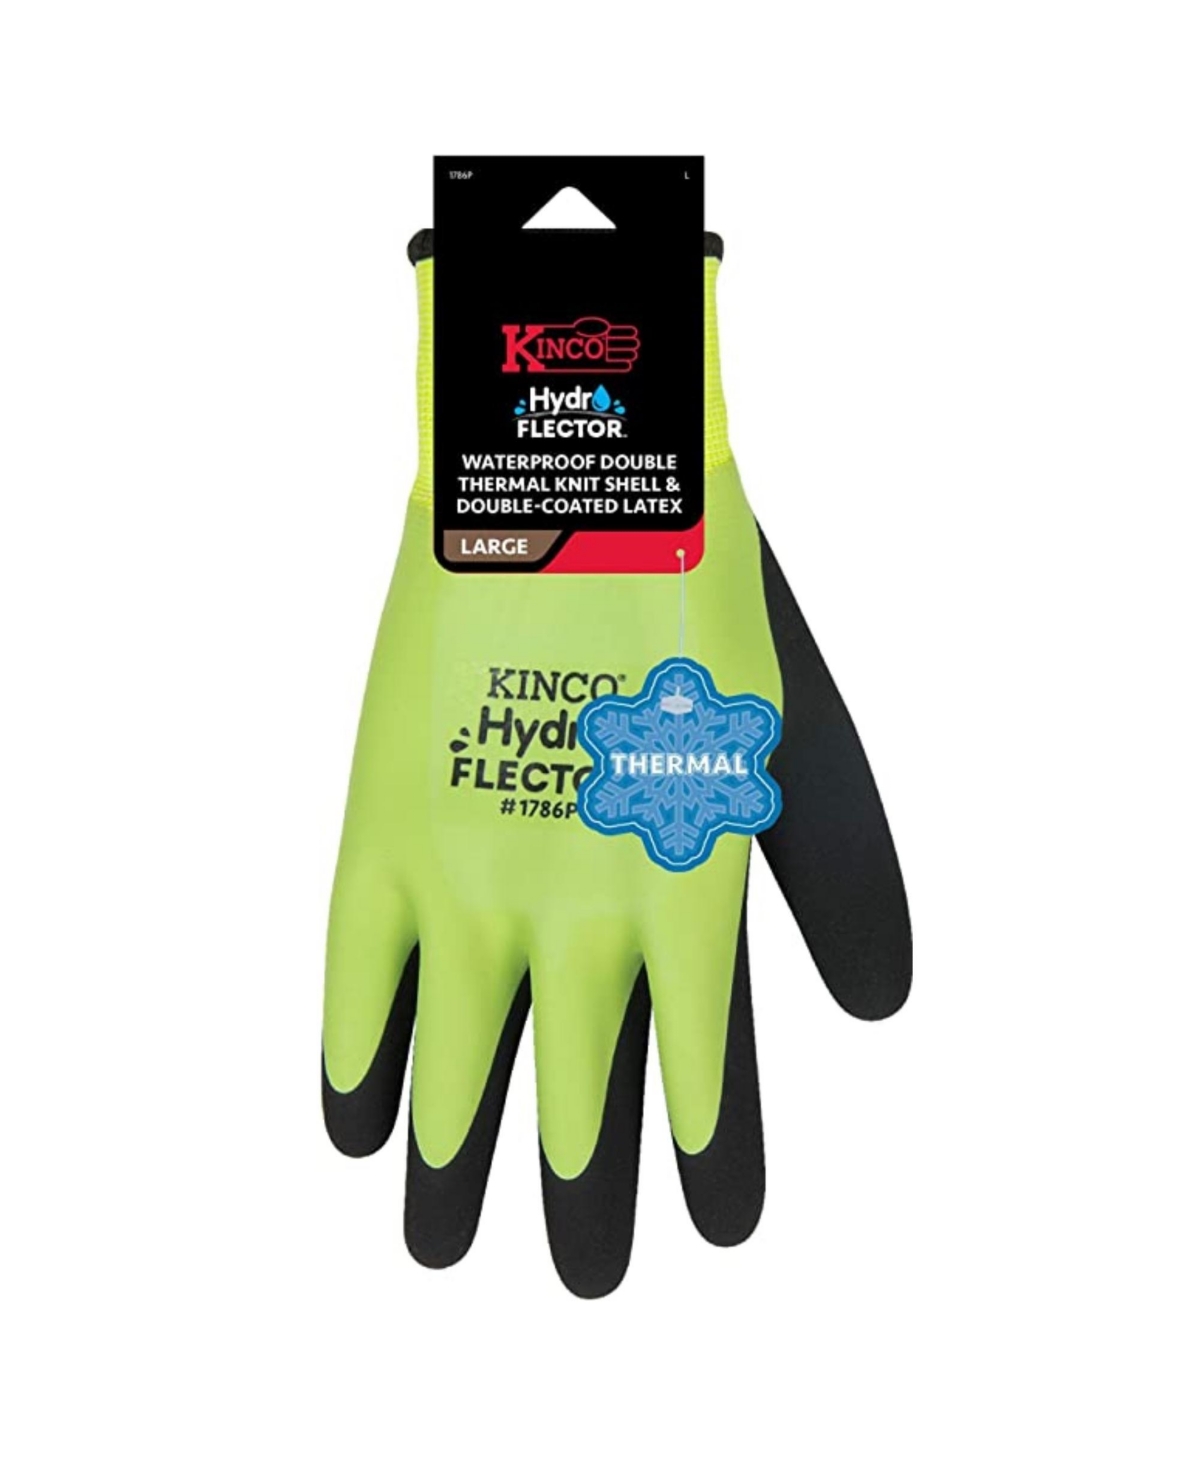 Kinco Hydroflector Waterproof Double Thermal Shell and Coated Latex Gloves- Lrg - Green